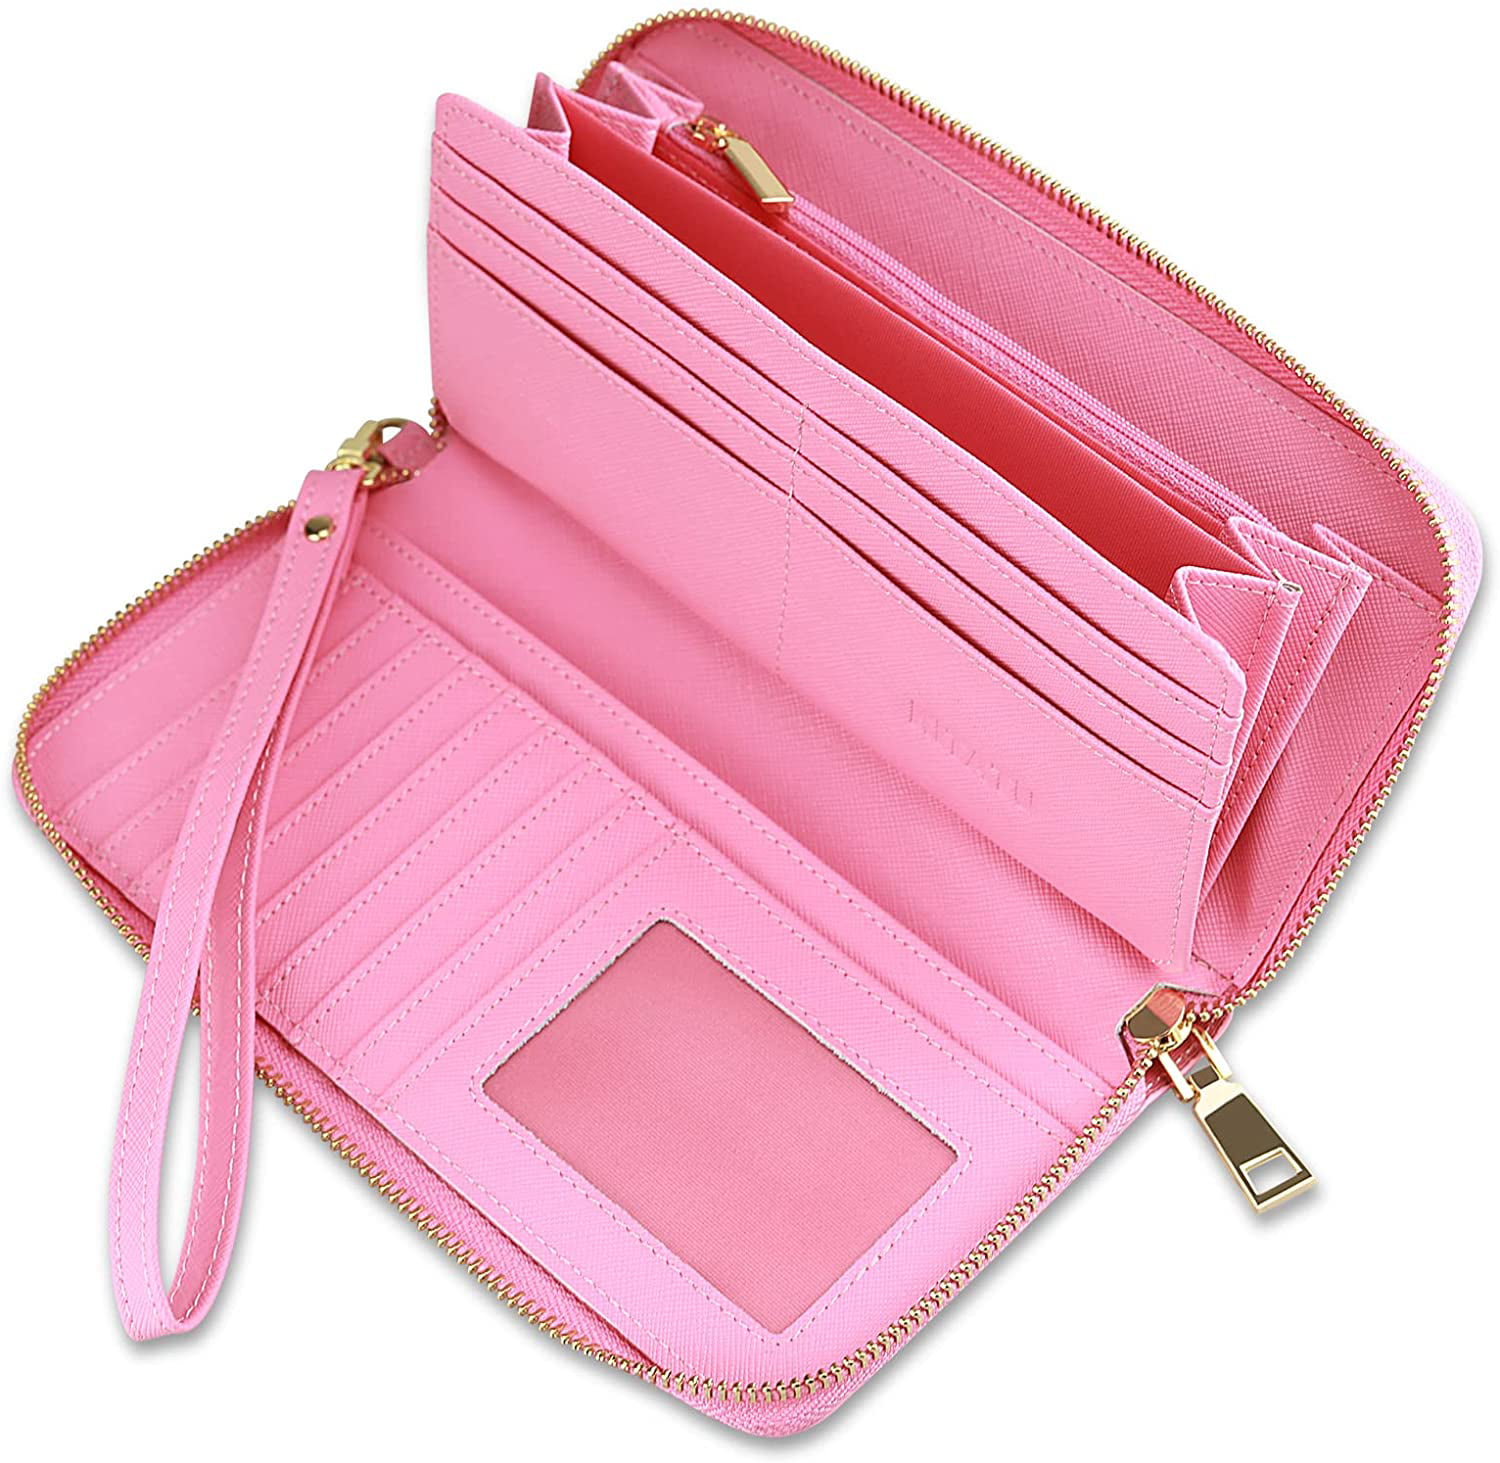 Conisy Large Capacity Purses for Women,Long Leather Multiple Card Slots Ladies Wallet with RFID Protection Pink 